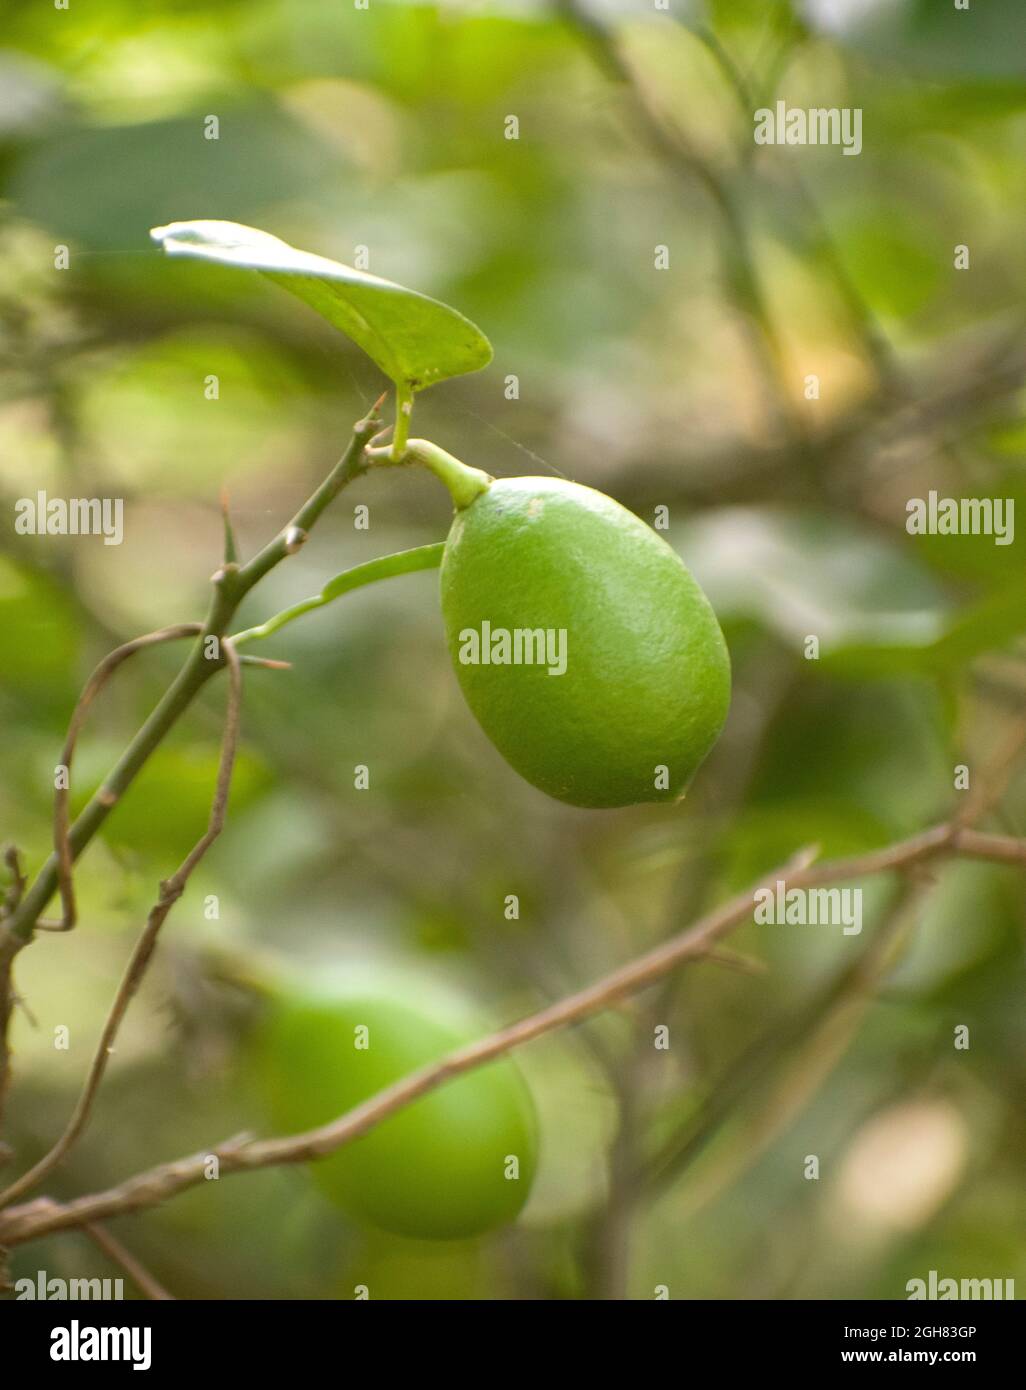 The lemon (Citrus limon) is a species of small evergreen tree Stock Photo